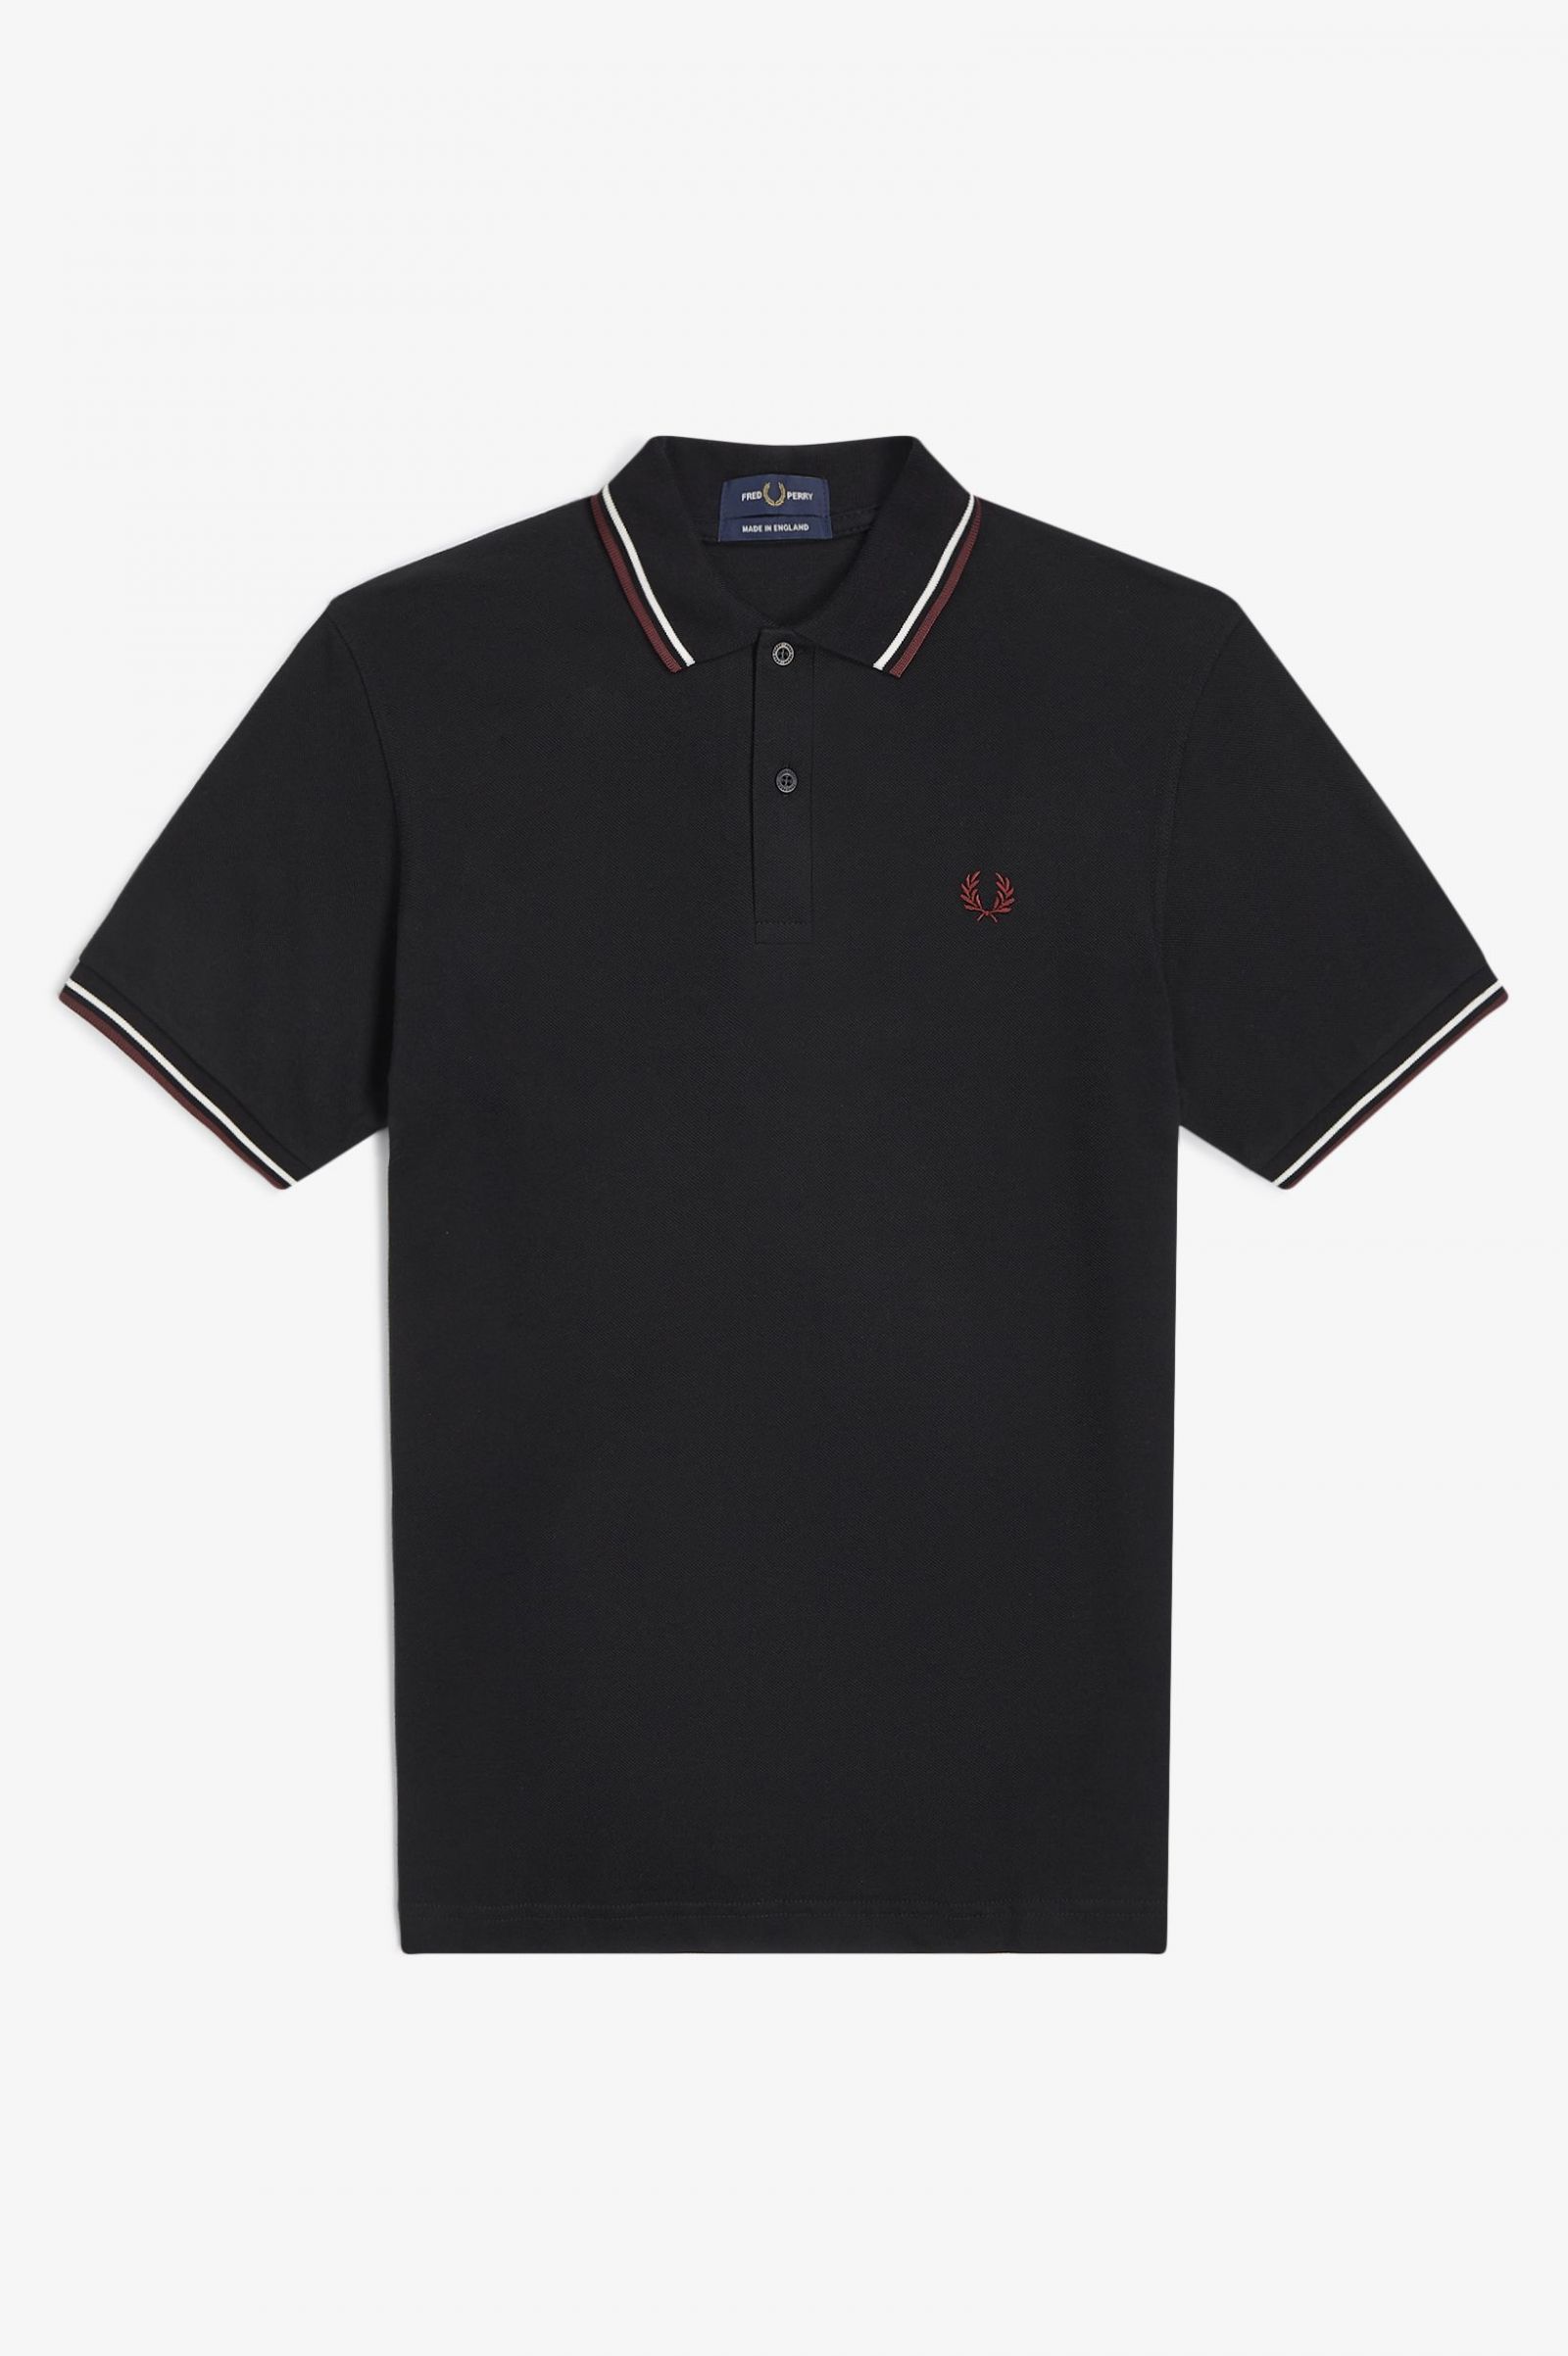 Fred Perry Made in England M12 Twin Tipped Shirt in Black/Ecru/Oxblood